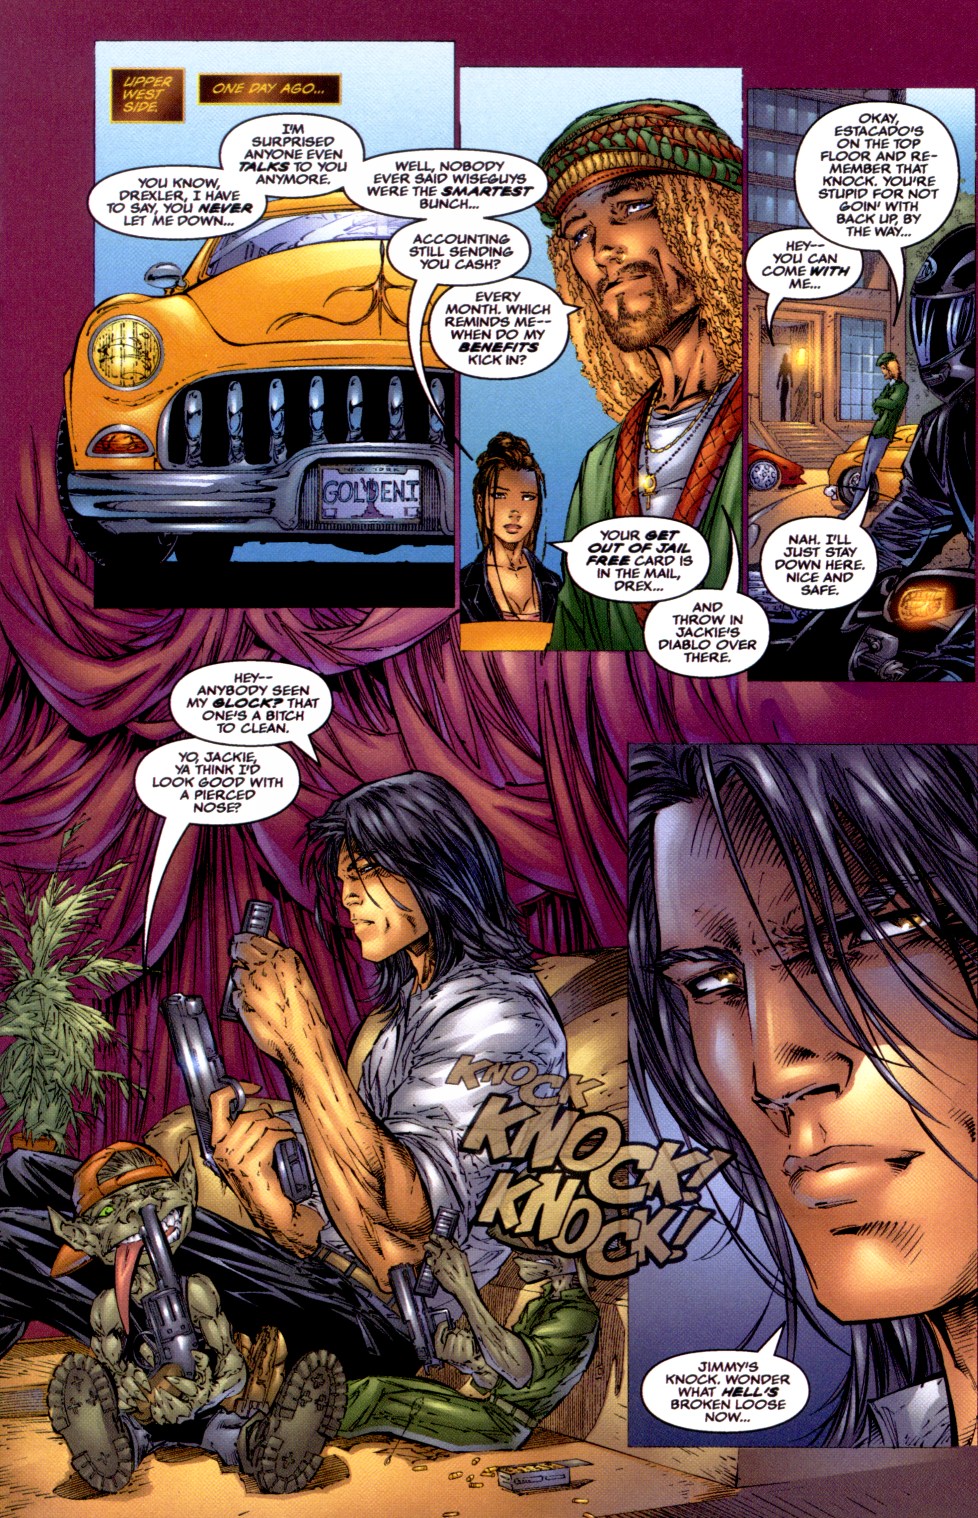 Witchblade #18 - Family Ties Part 1 - Continued From The Darkness #8 